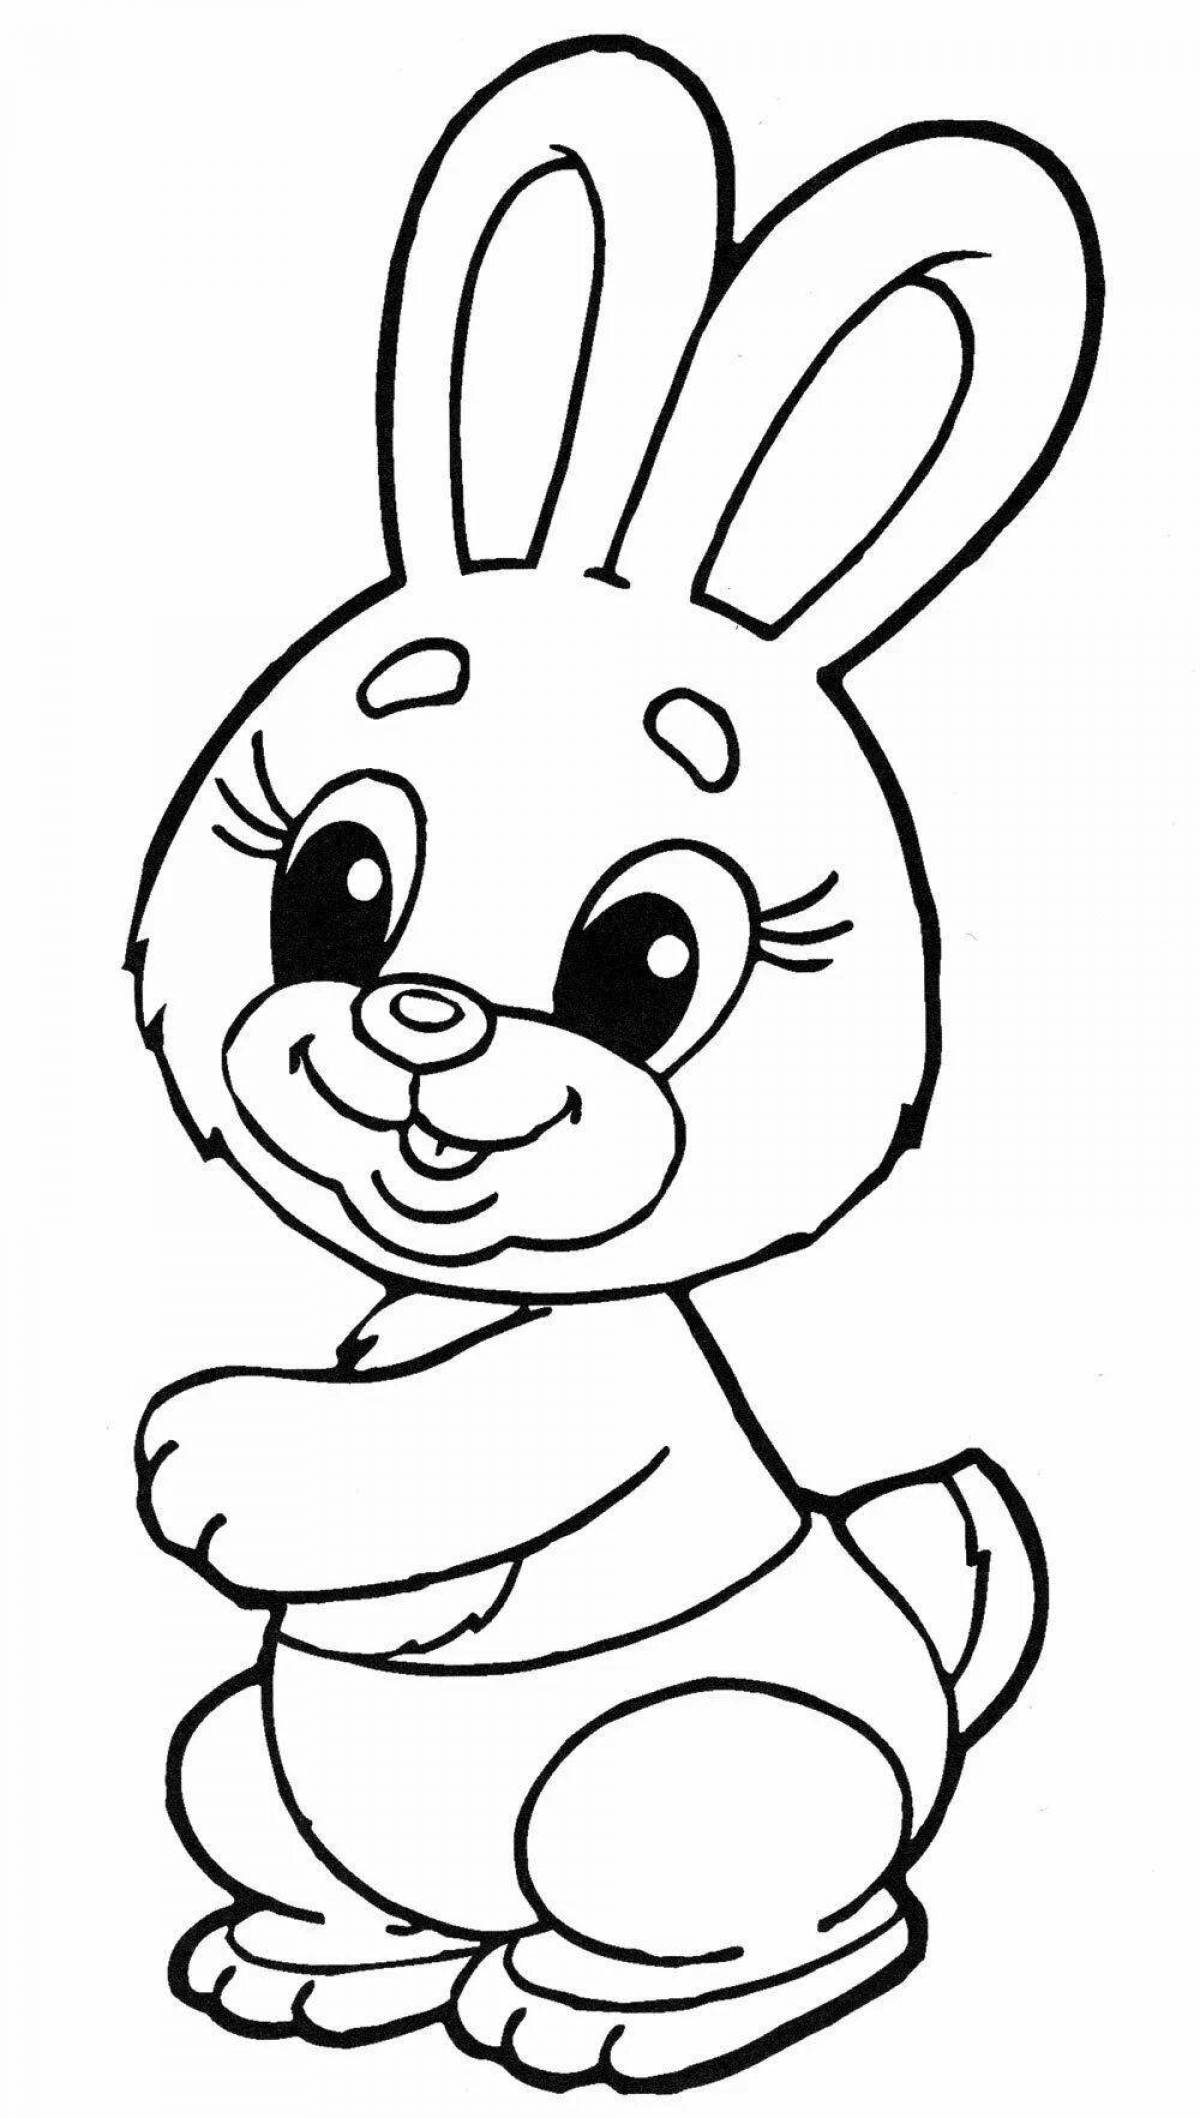 Blissful coloring page rabbit drawing